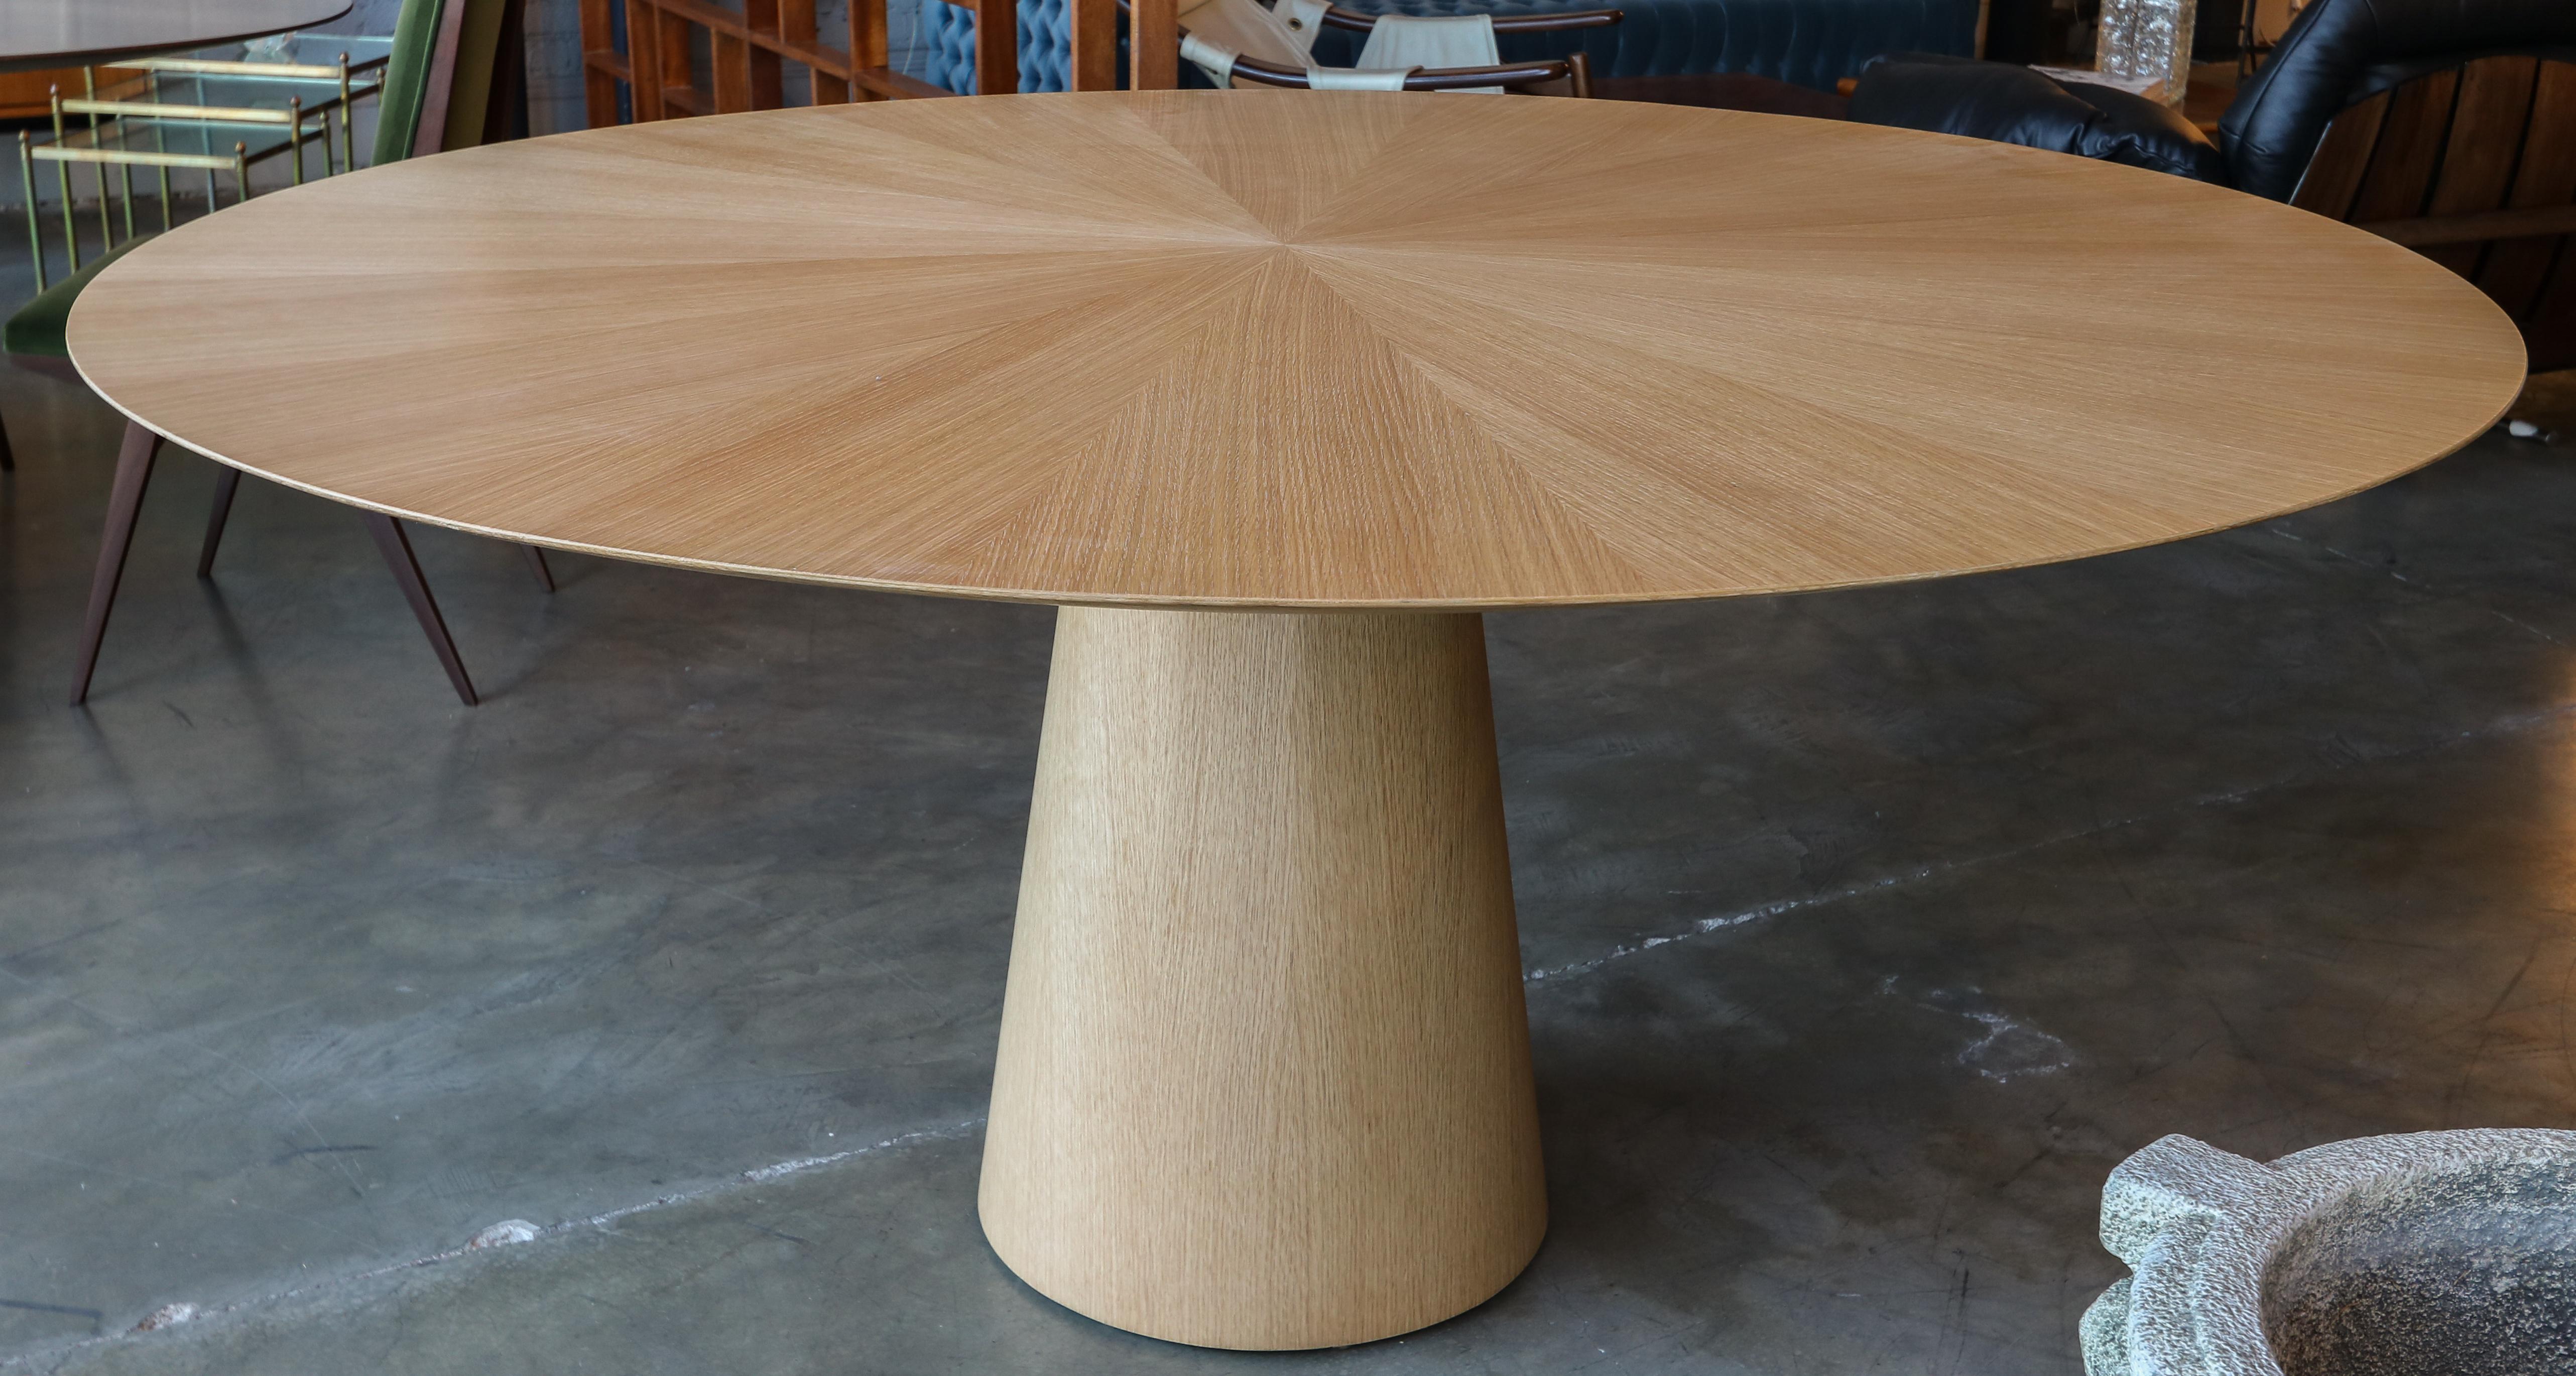 Custom round dining table with pedestal leg made in American oak.  Made in Los Angeles by Adesso Imports.

Can be done in different woods, finishes and sizes.